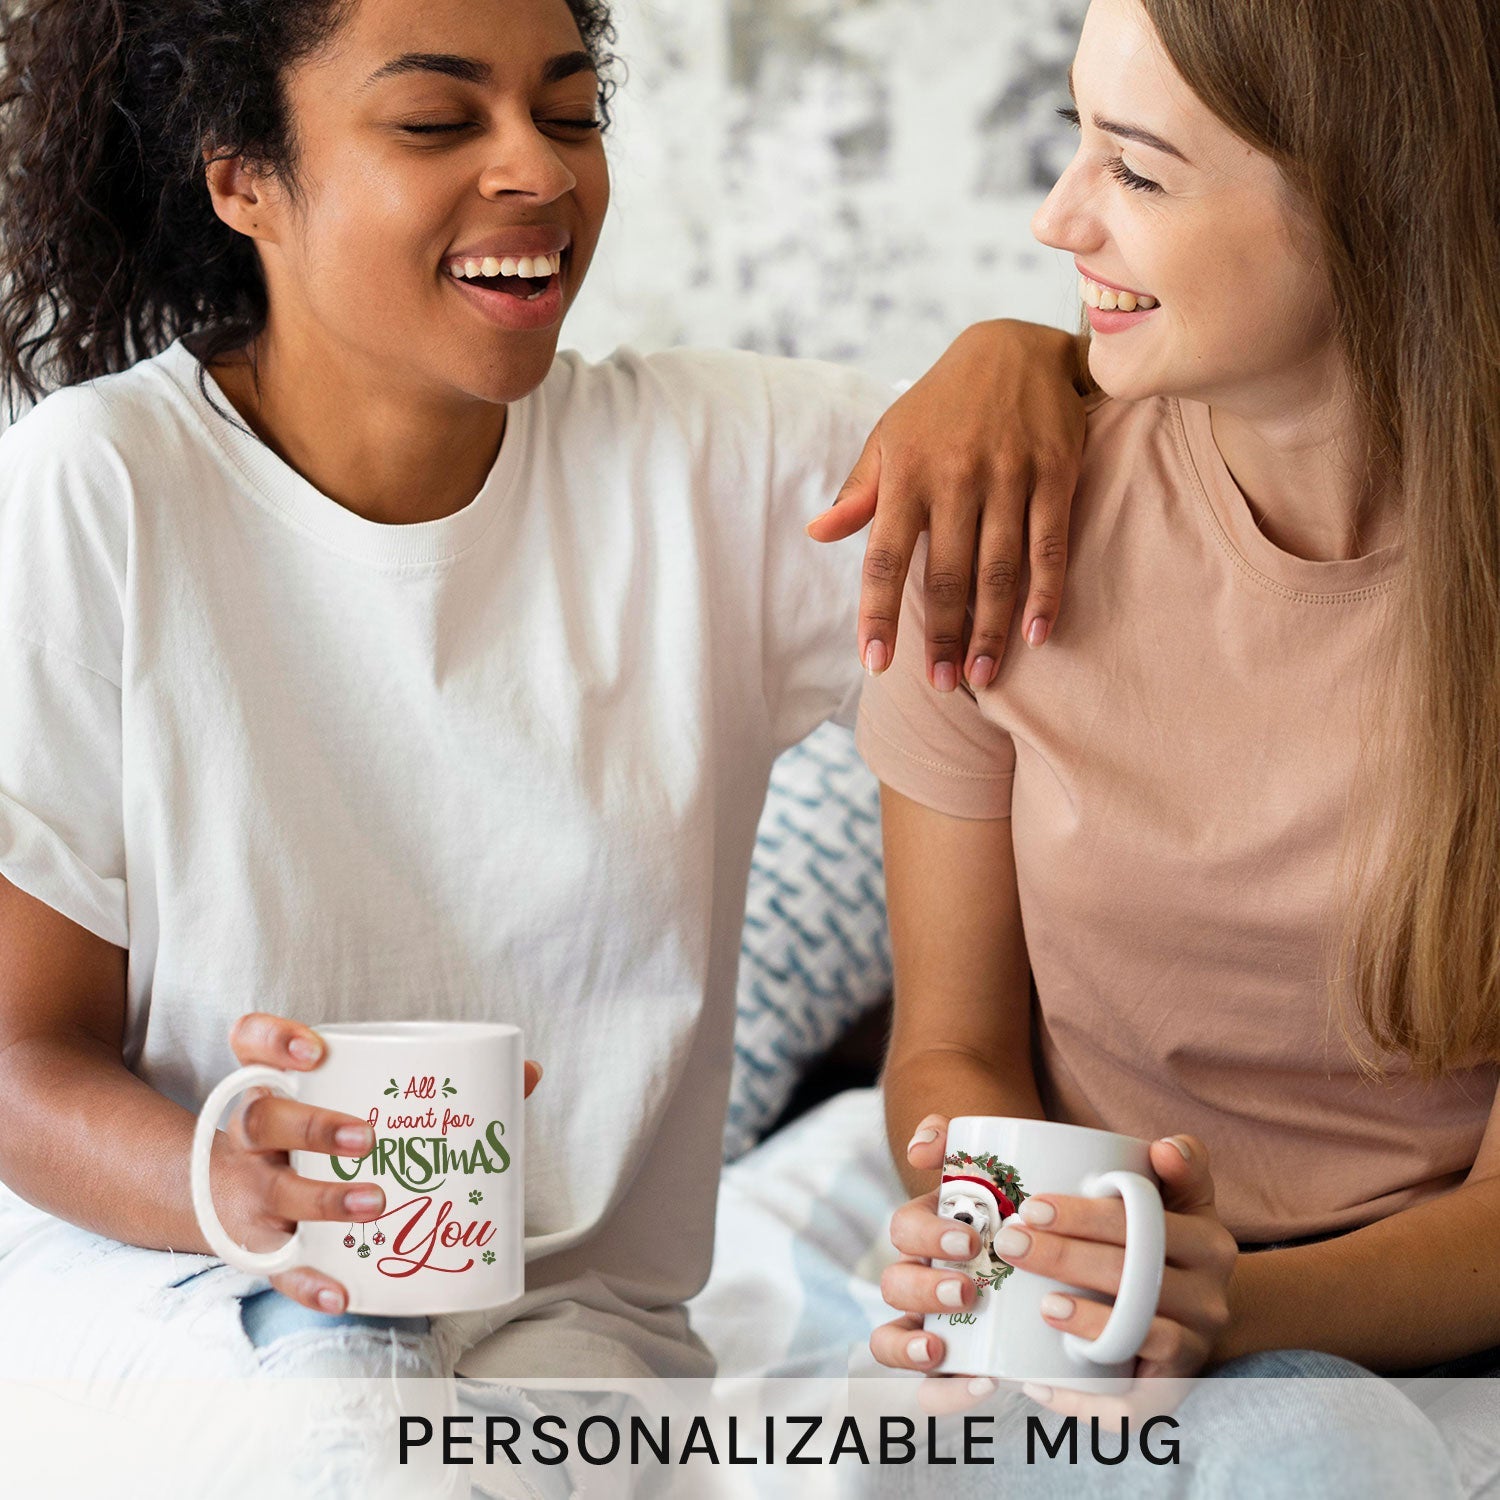 All I Want For Christmas Is You - Personalized Christmas gift for Dog Lovers - Custom Mug - MyMindfulGifts